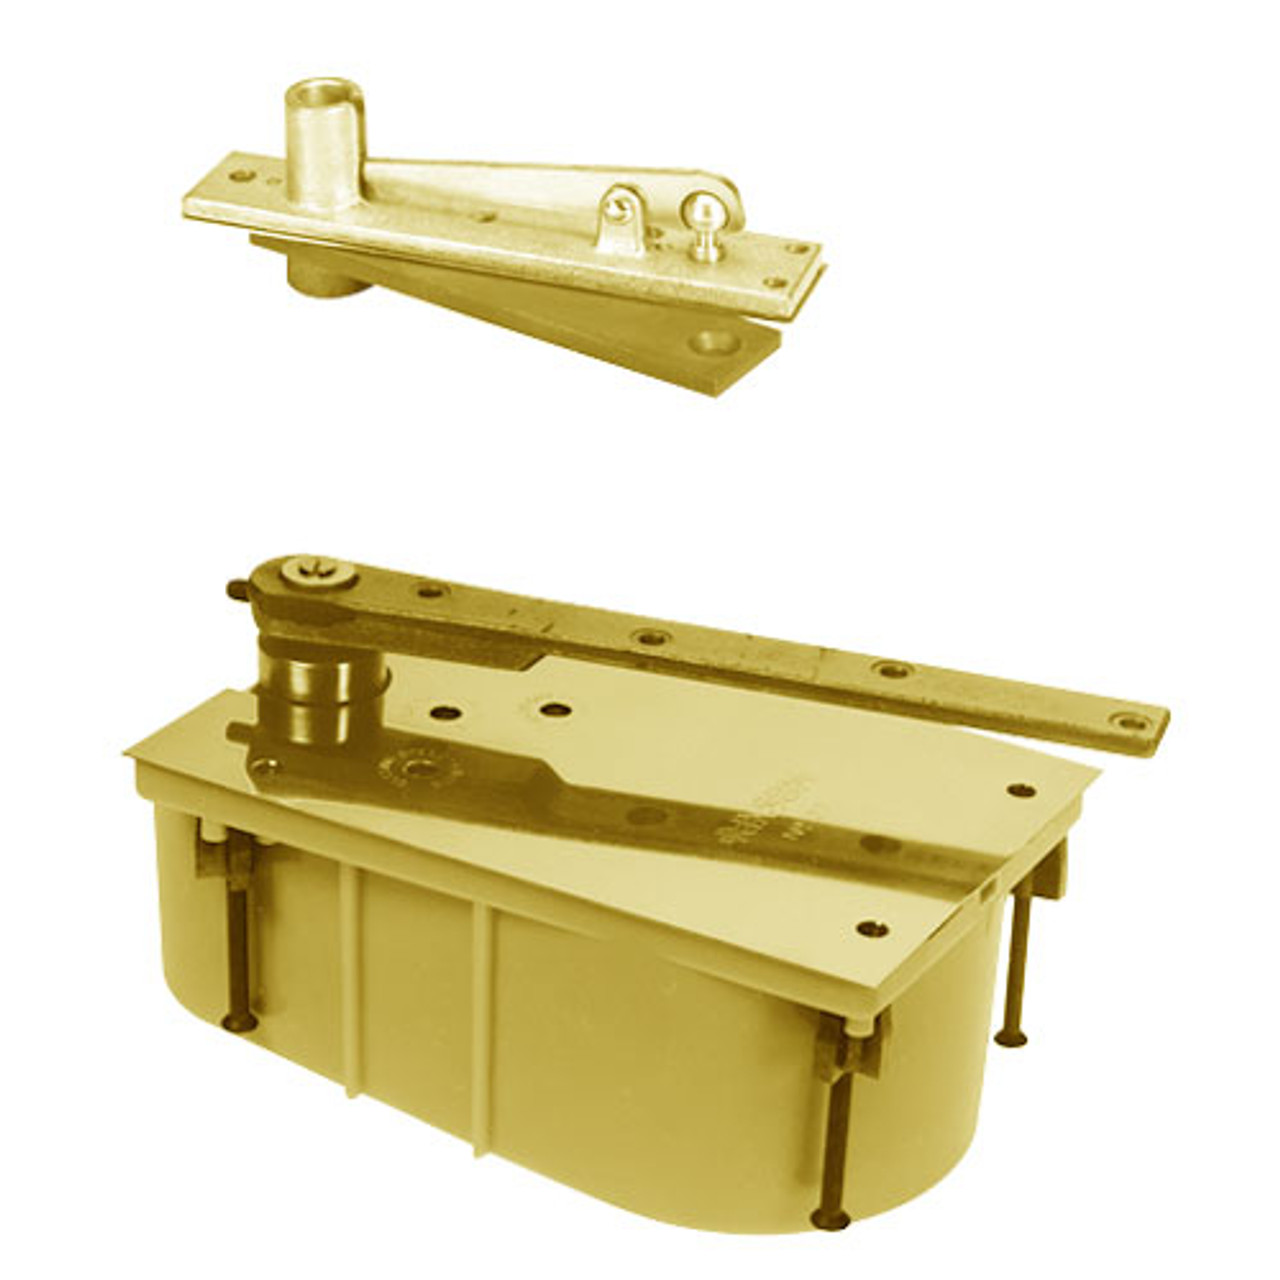 28-105S-554-RH-605 Rixson 28 Series Heavy Duty Single Acting Center Hung Floor Closer with Concealed Arm in Bright Brass Finish